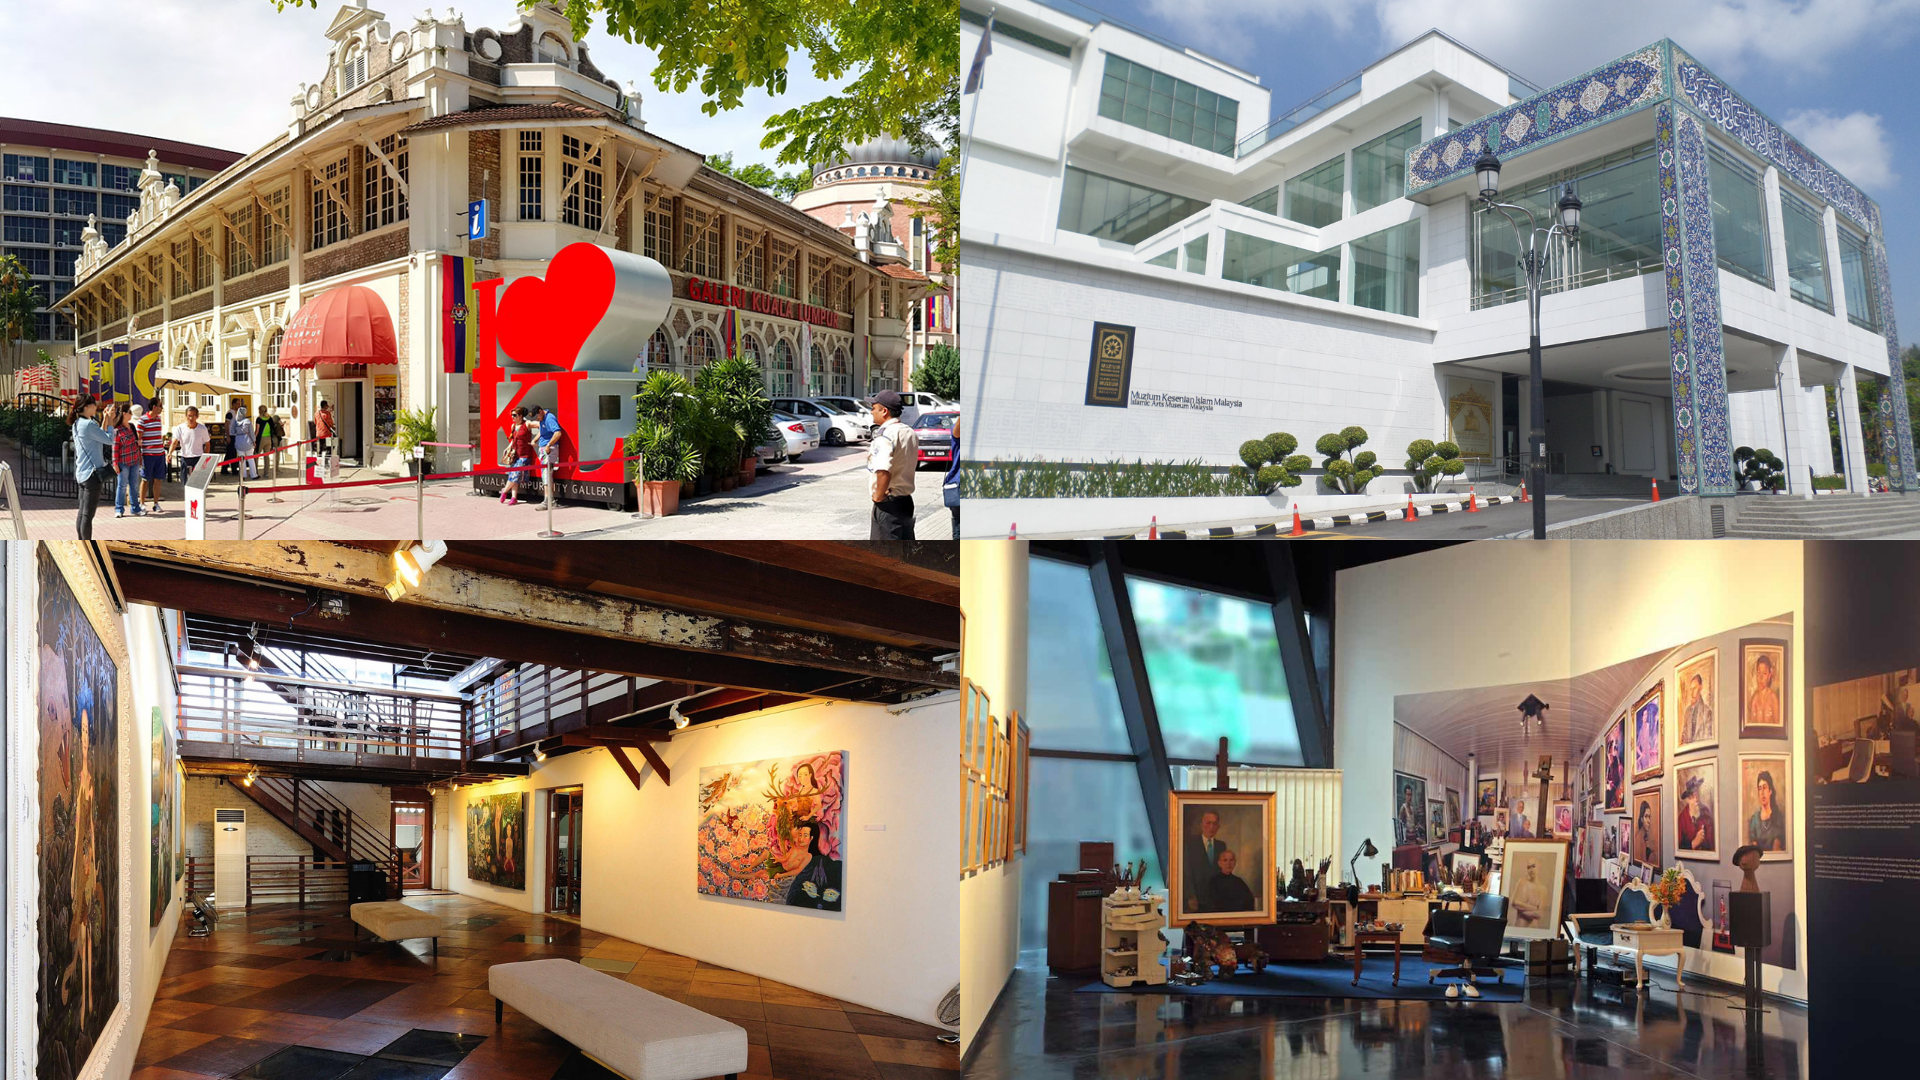 Feeling The Art-Bug? Check Out These 9 Art Galleries And Museums In KL!